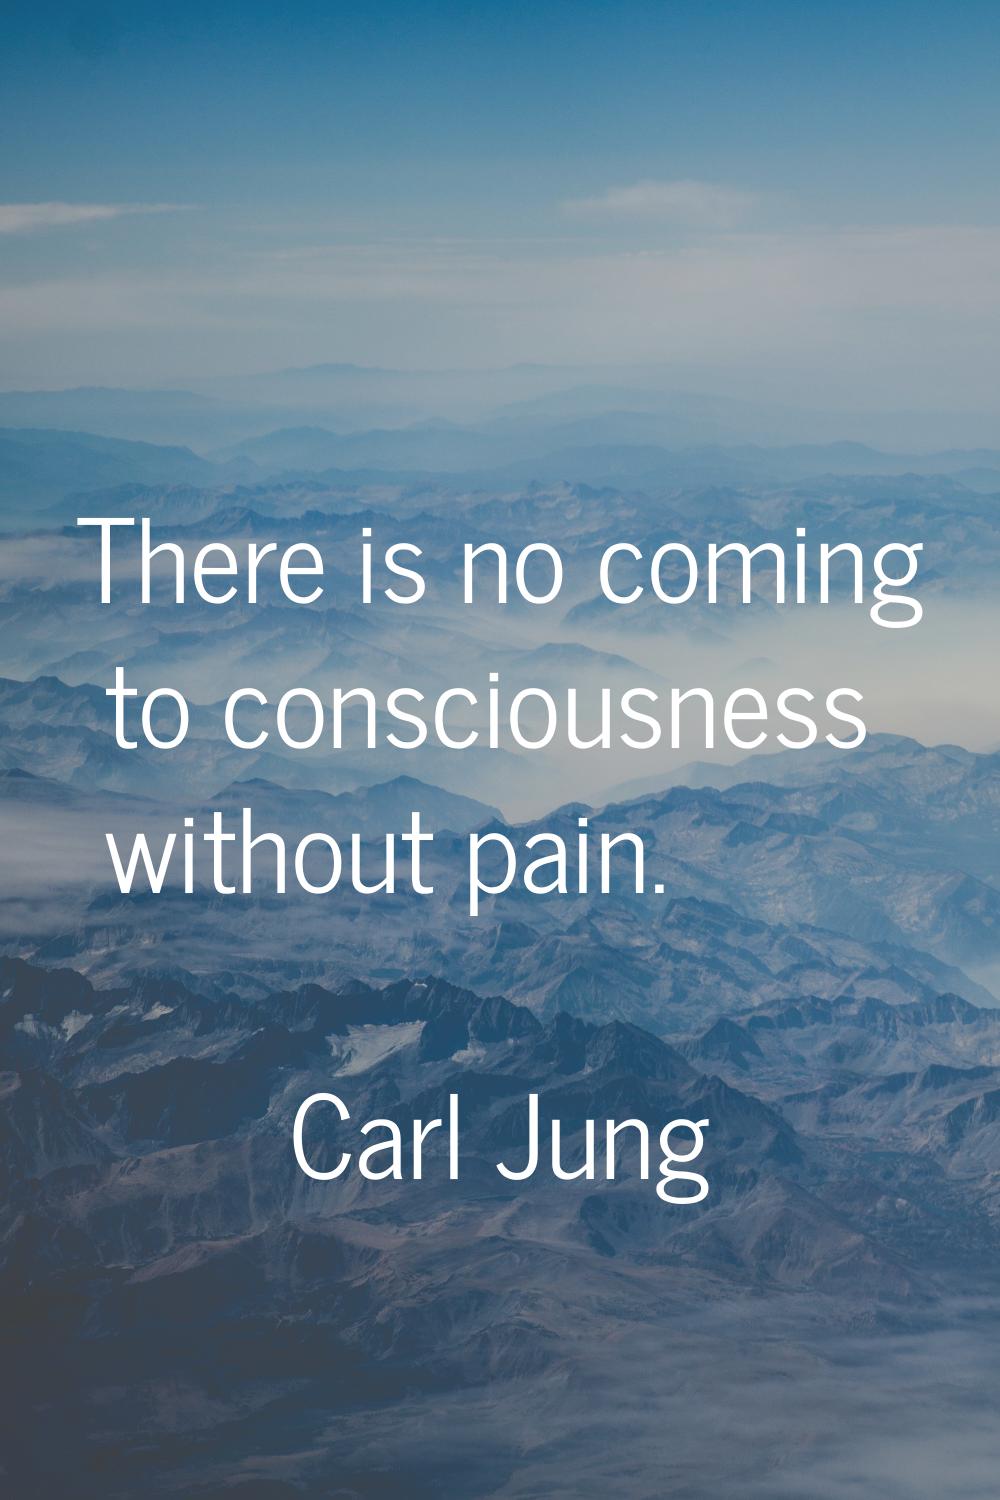 There is no coming to consciousness without pain.